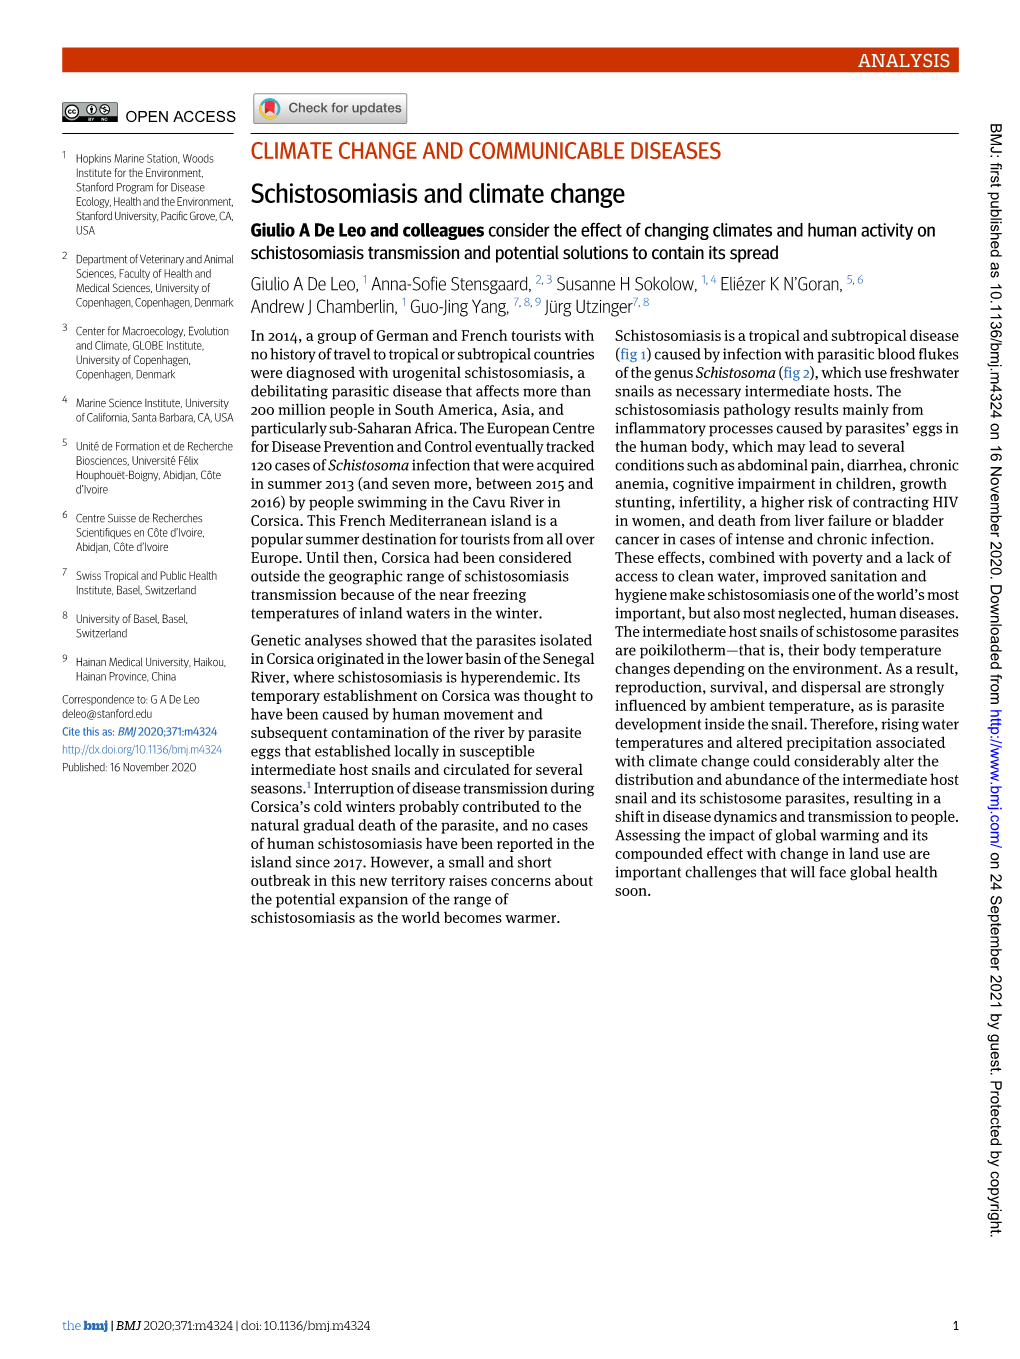 Schistosomiasis and Climate Change